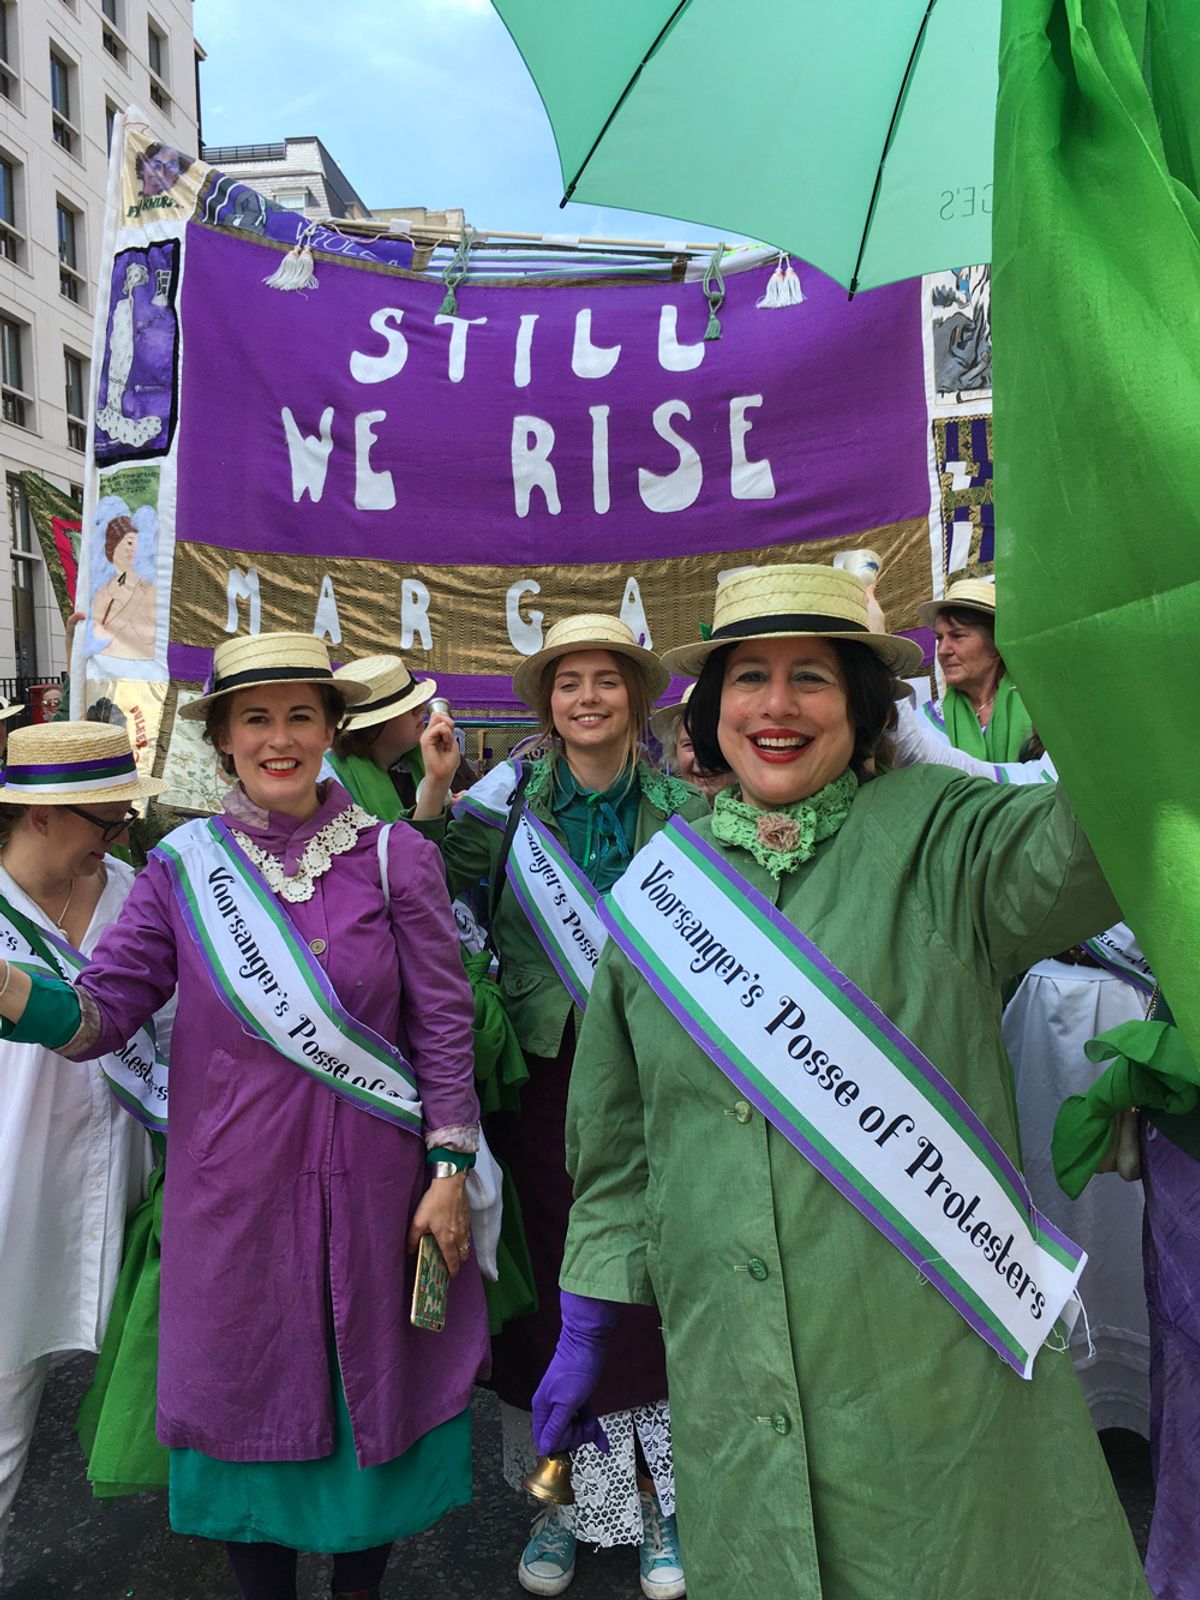 The artist Jessica Voorsanger (right) and her posse, resplendent in the colours of the suffragettes Louisa Buck